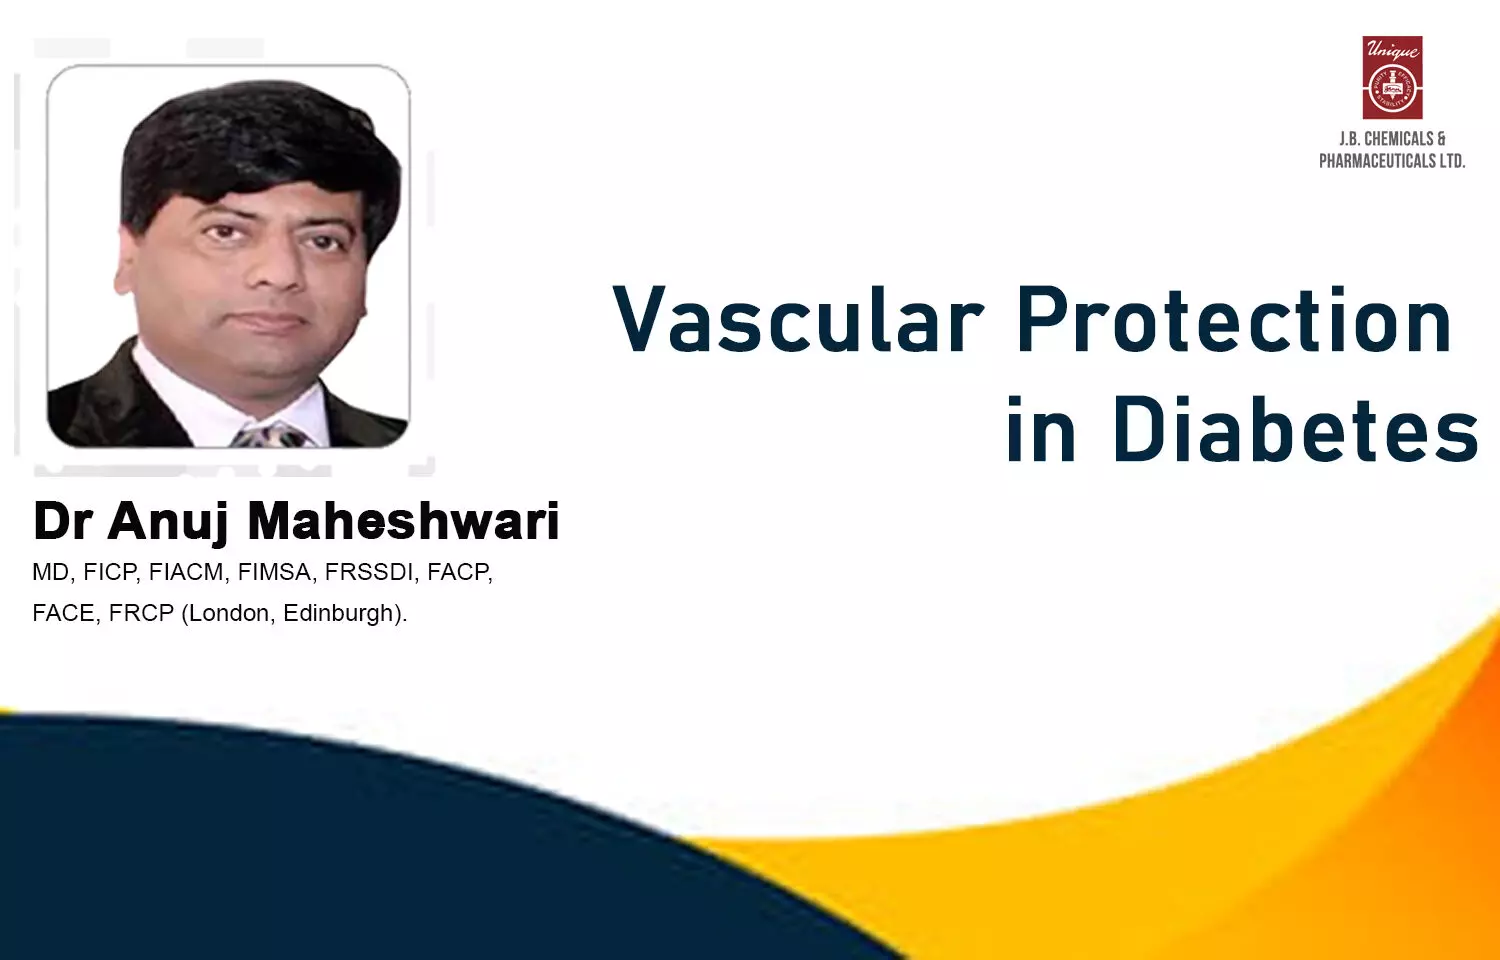 Vascular Protection in Diabetes